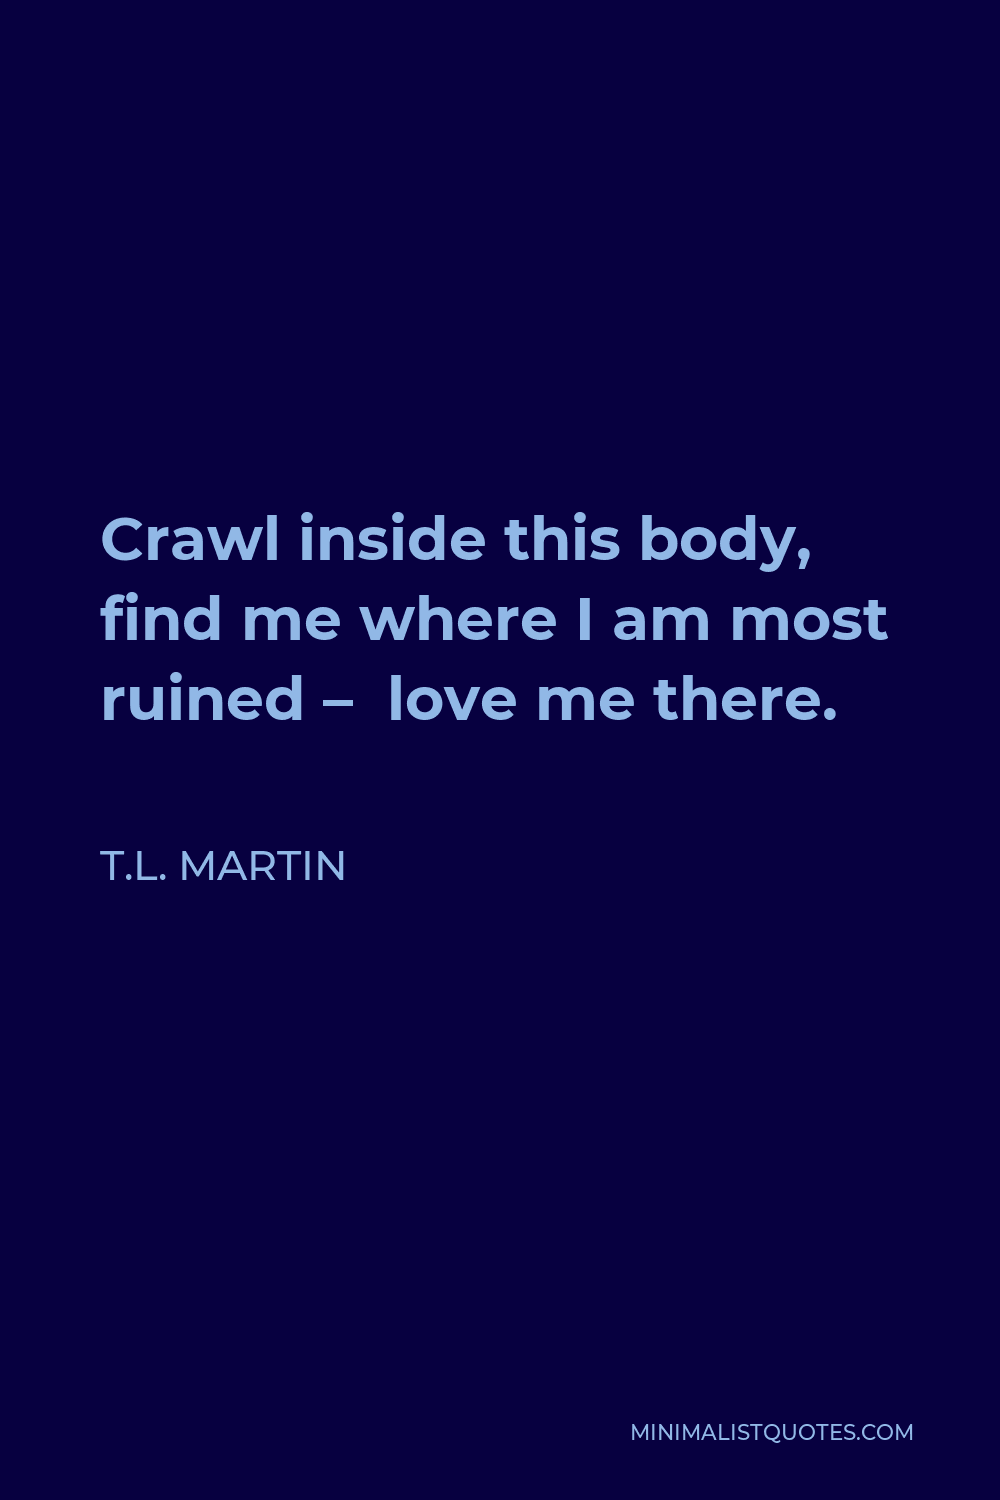 T.L. Martin Quote - Crawl inside this body, find me where I am most ruined— love me there.